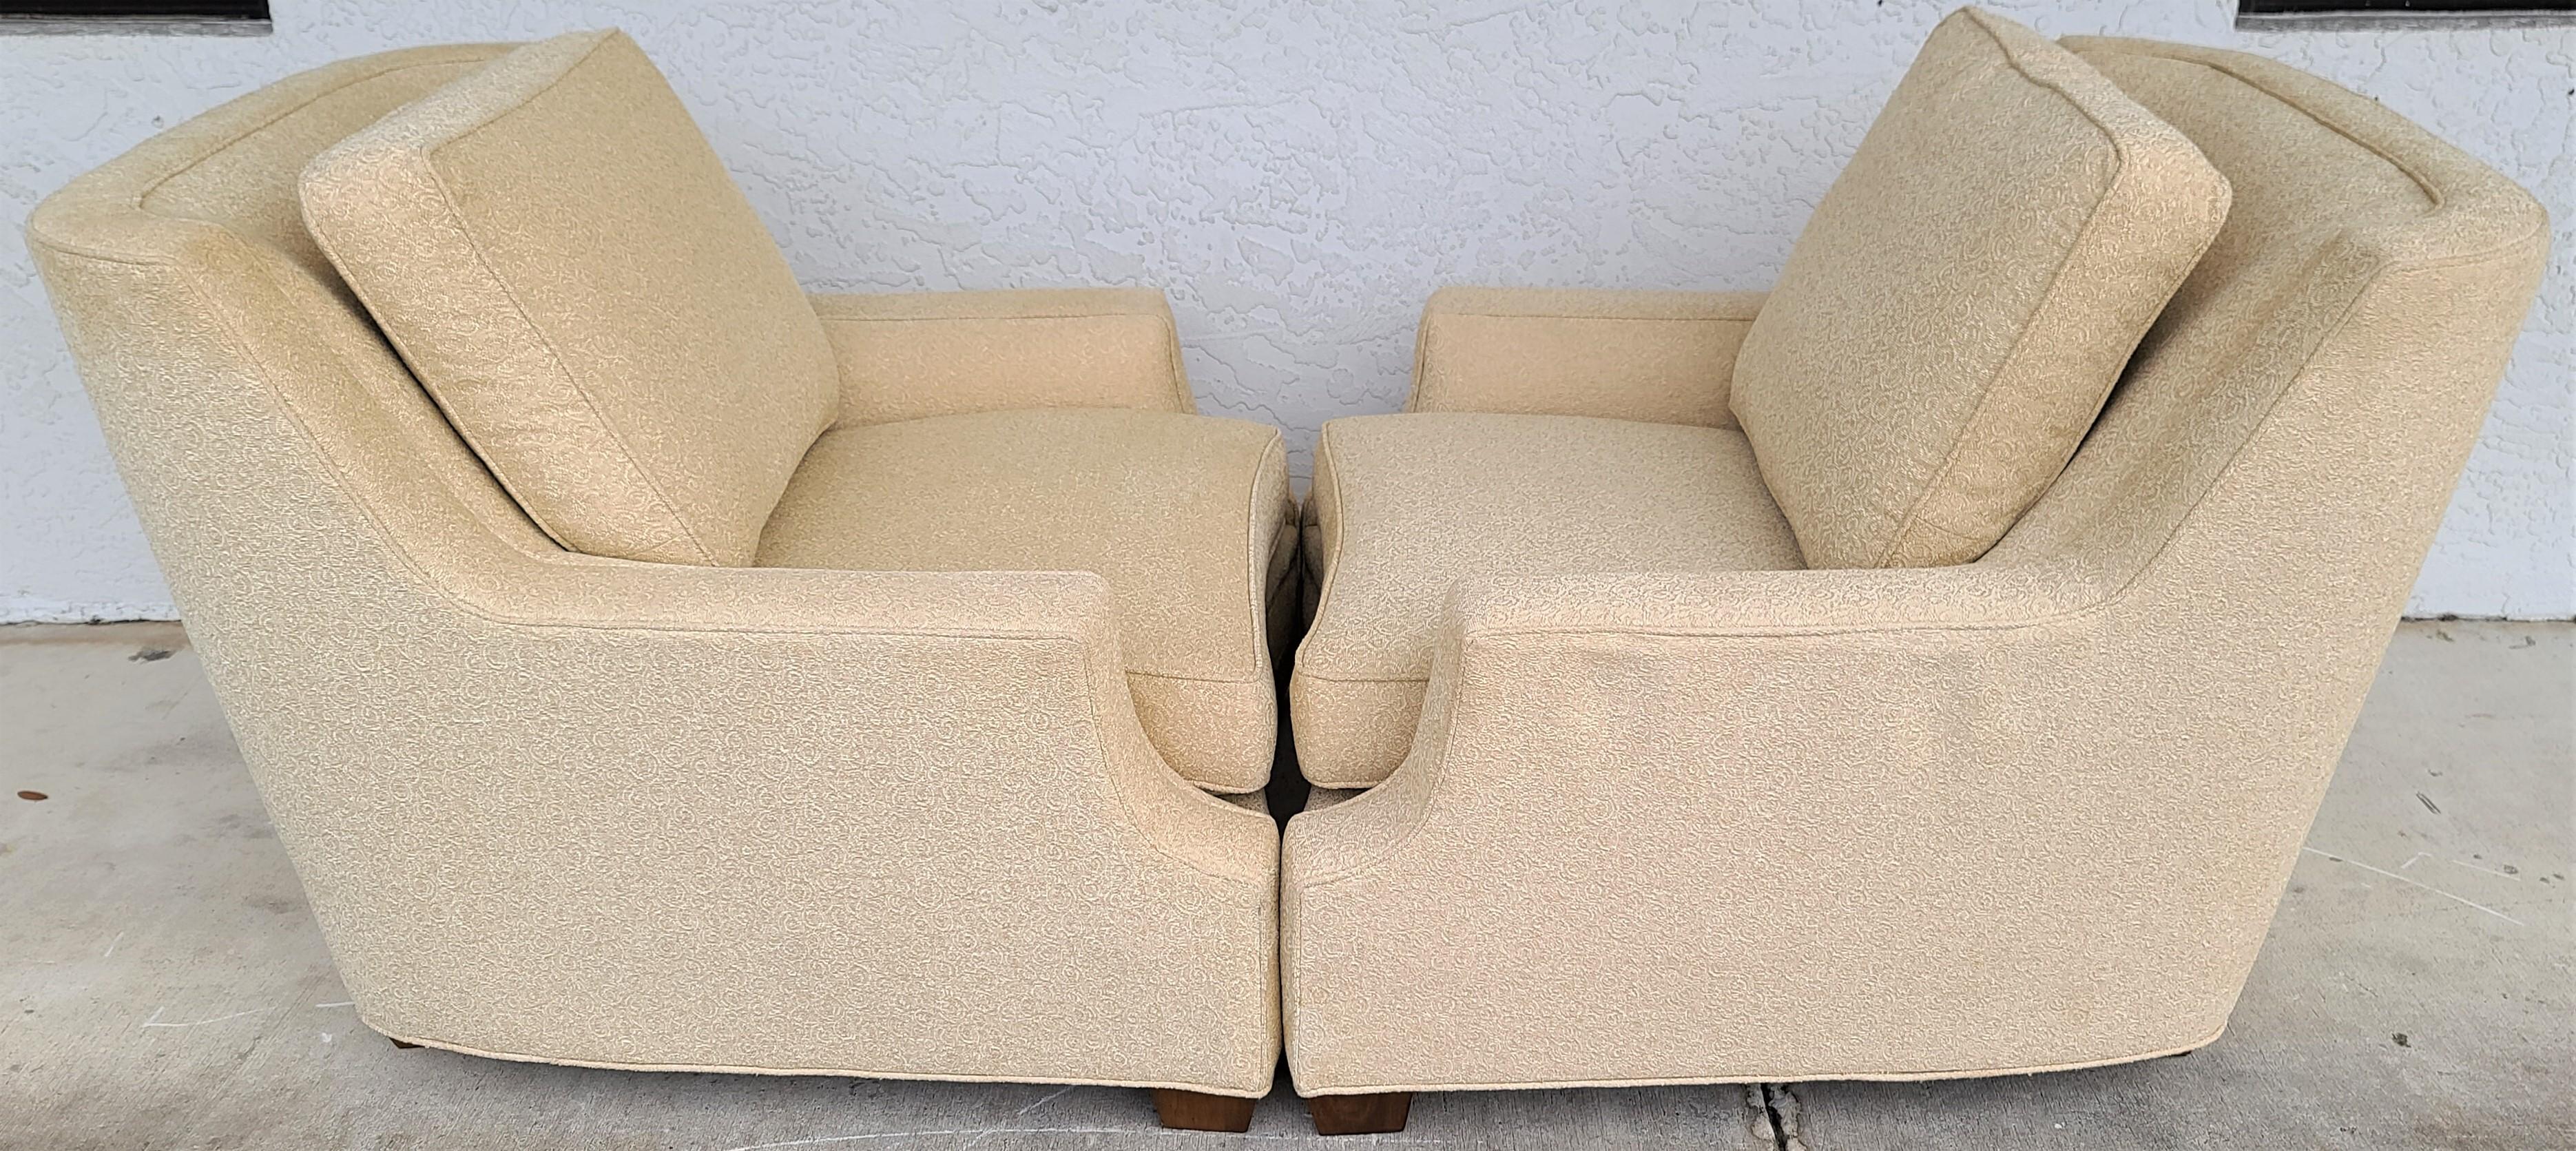 Offering One of our recent palm beach estate fine furniture acquisitions of a
Pair of very comfortable Century Furniture co oversized beige lounge chairs 

Approximate Measurements in Inches
36